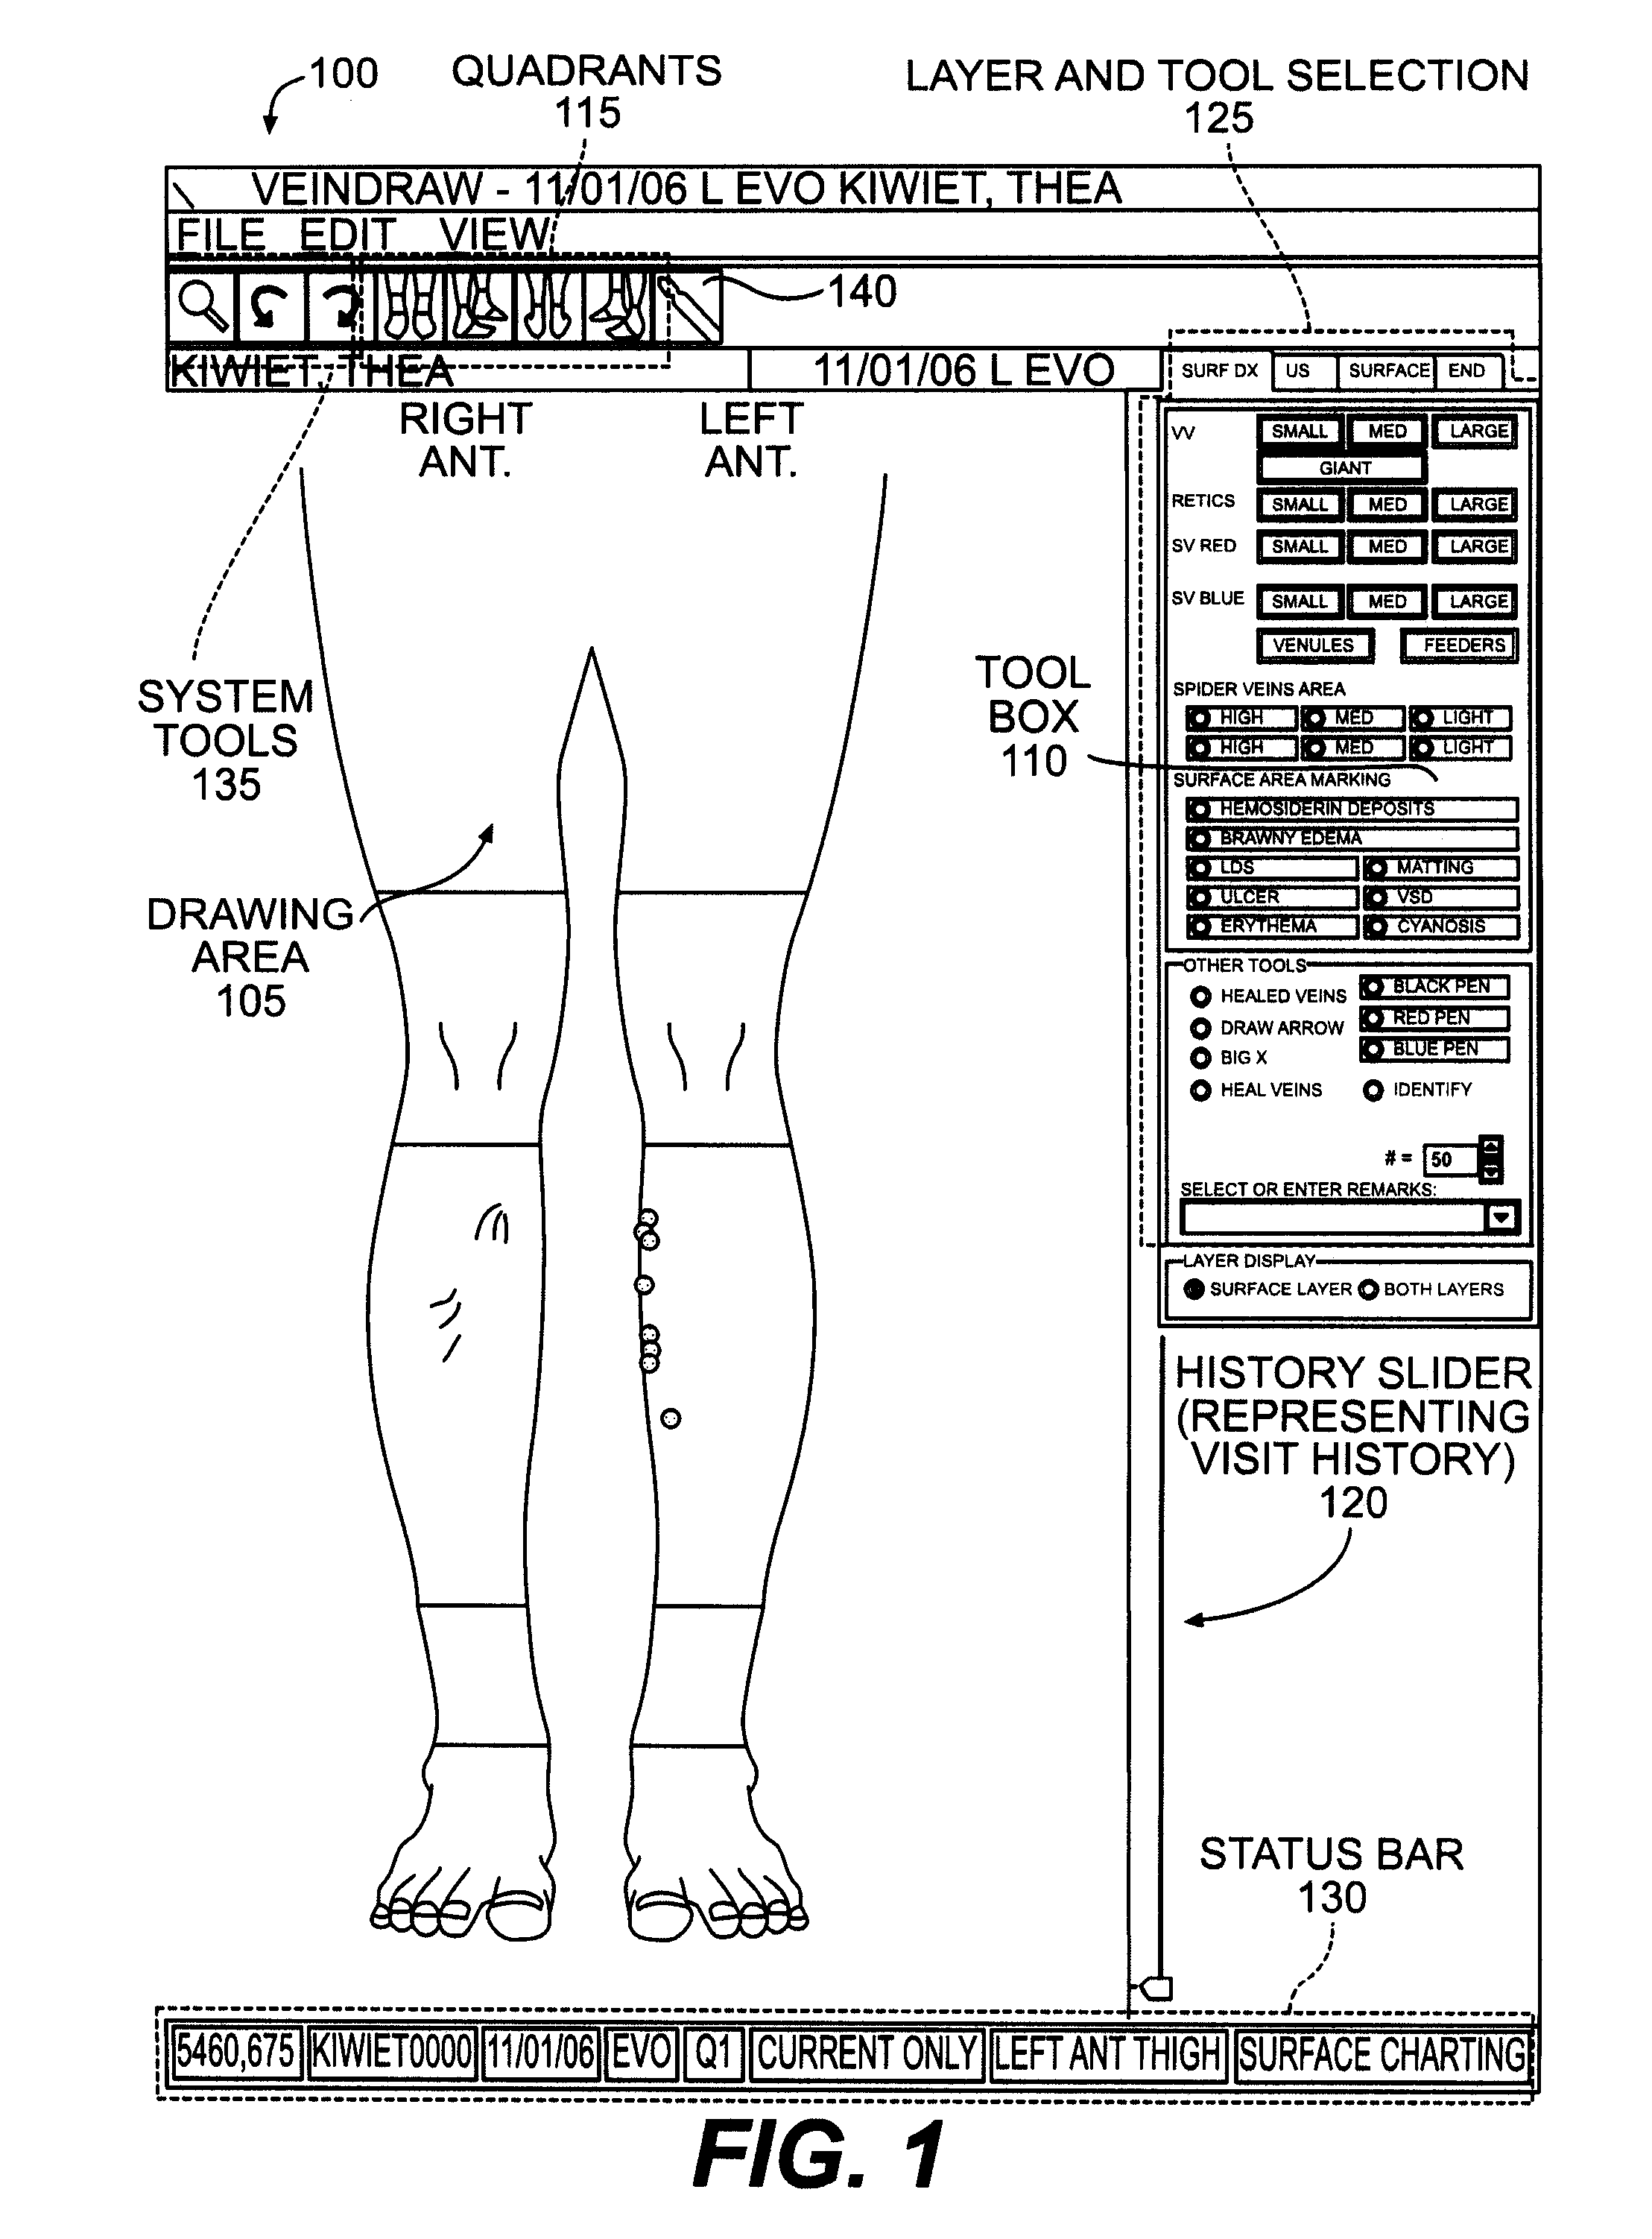 System and methods for capturing a medical drawing or sketch for generating progress notes, diagnosis and billing codes